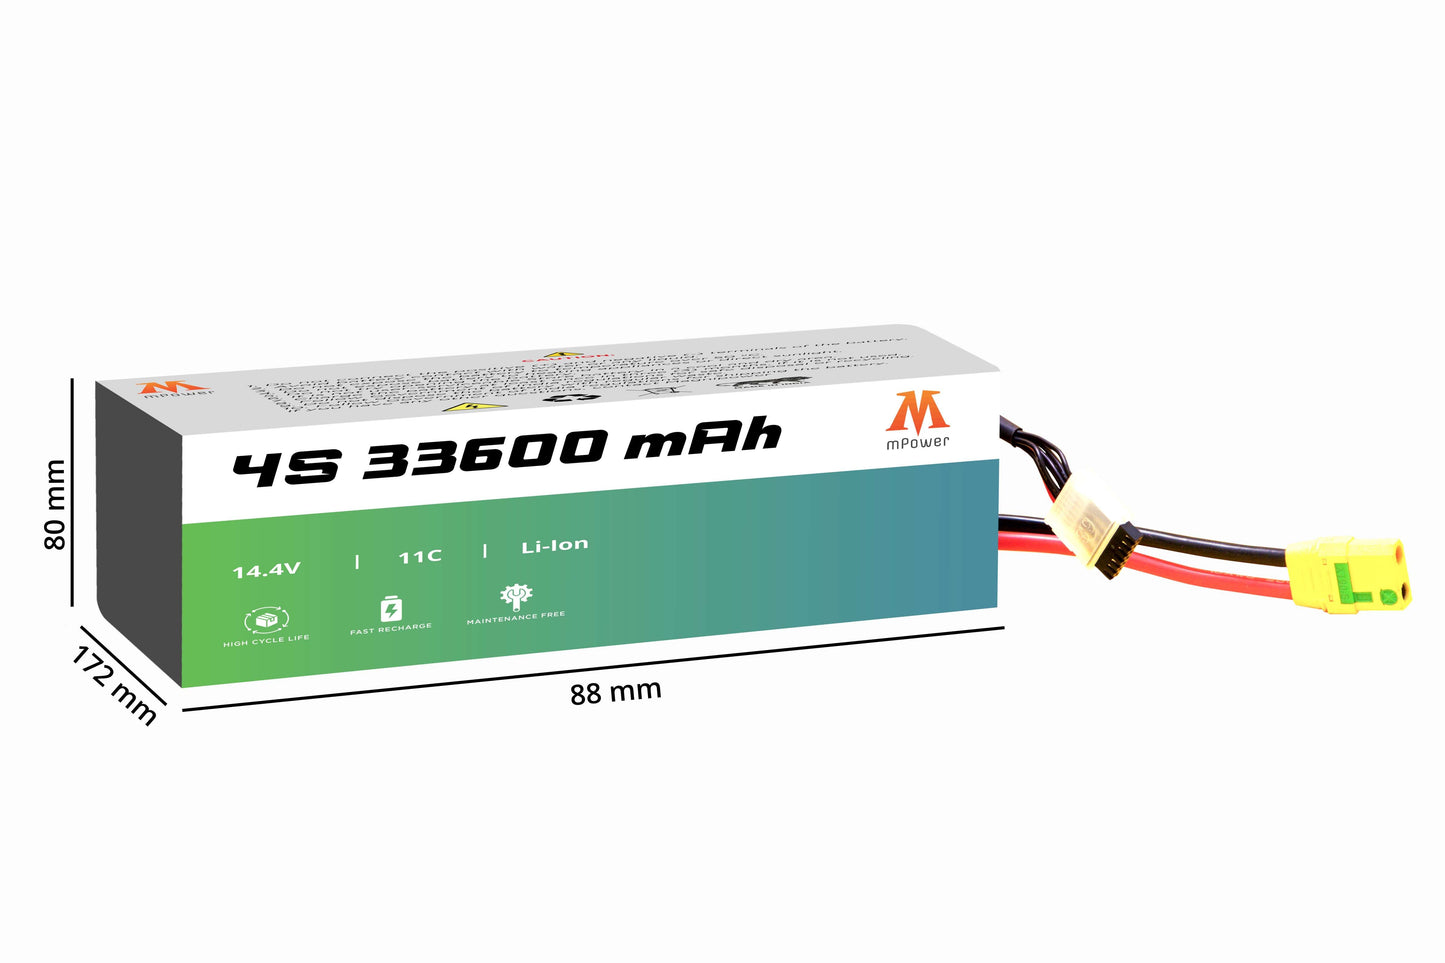 mPower 4S 33600mAh Lithium-Ion Battery for Survey Drones-mpowerlithium